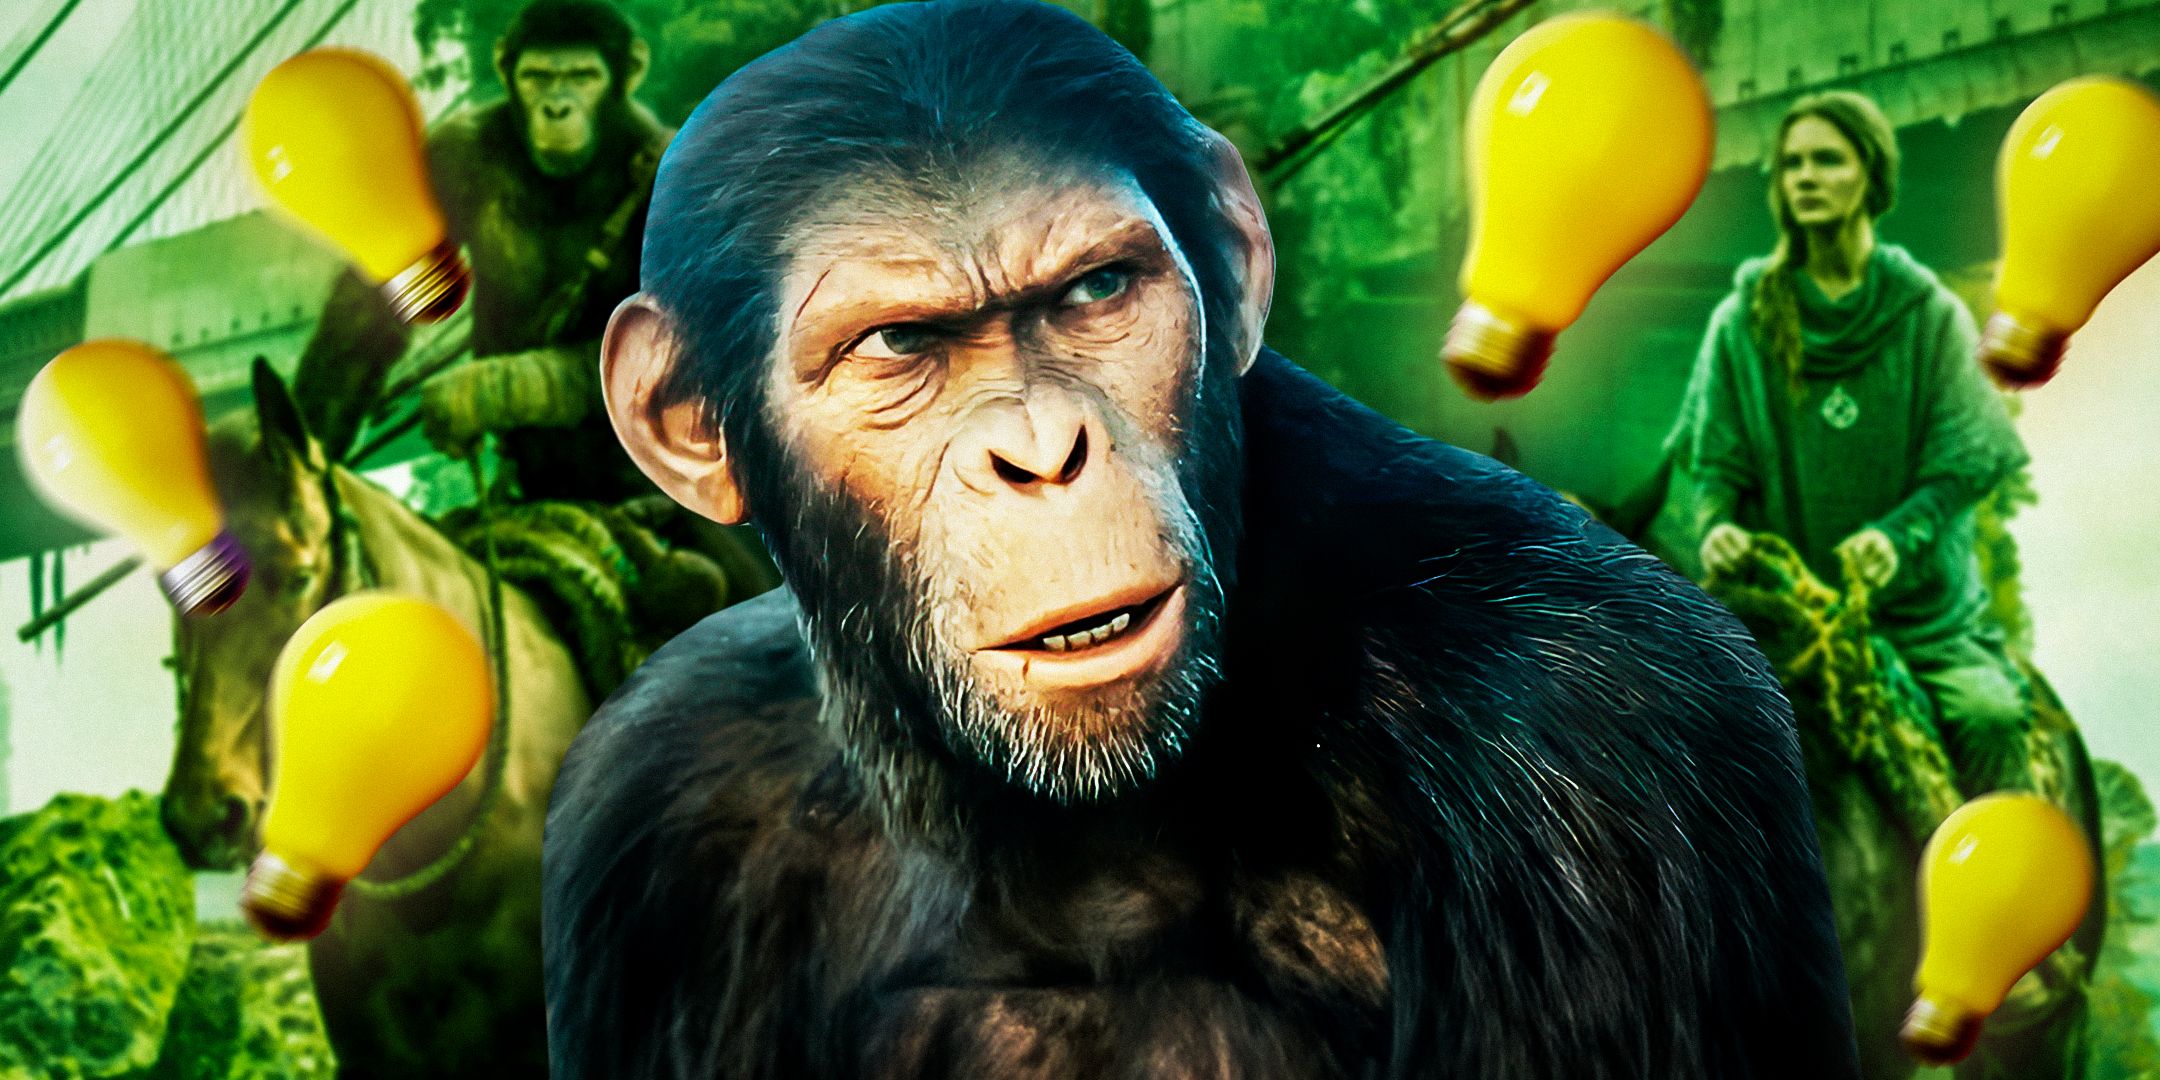 Custom image of Noa from Kingdom of the Planet of the Apes